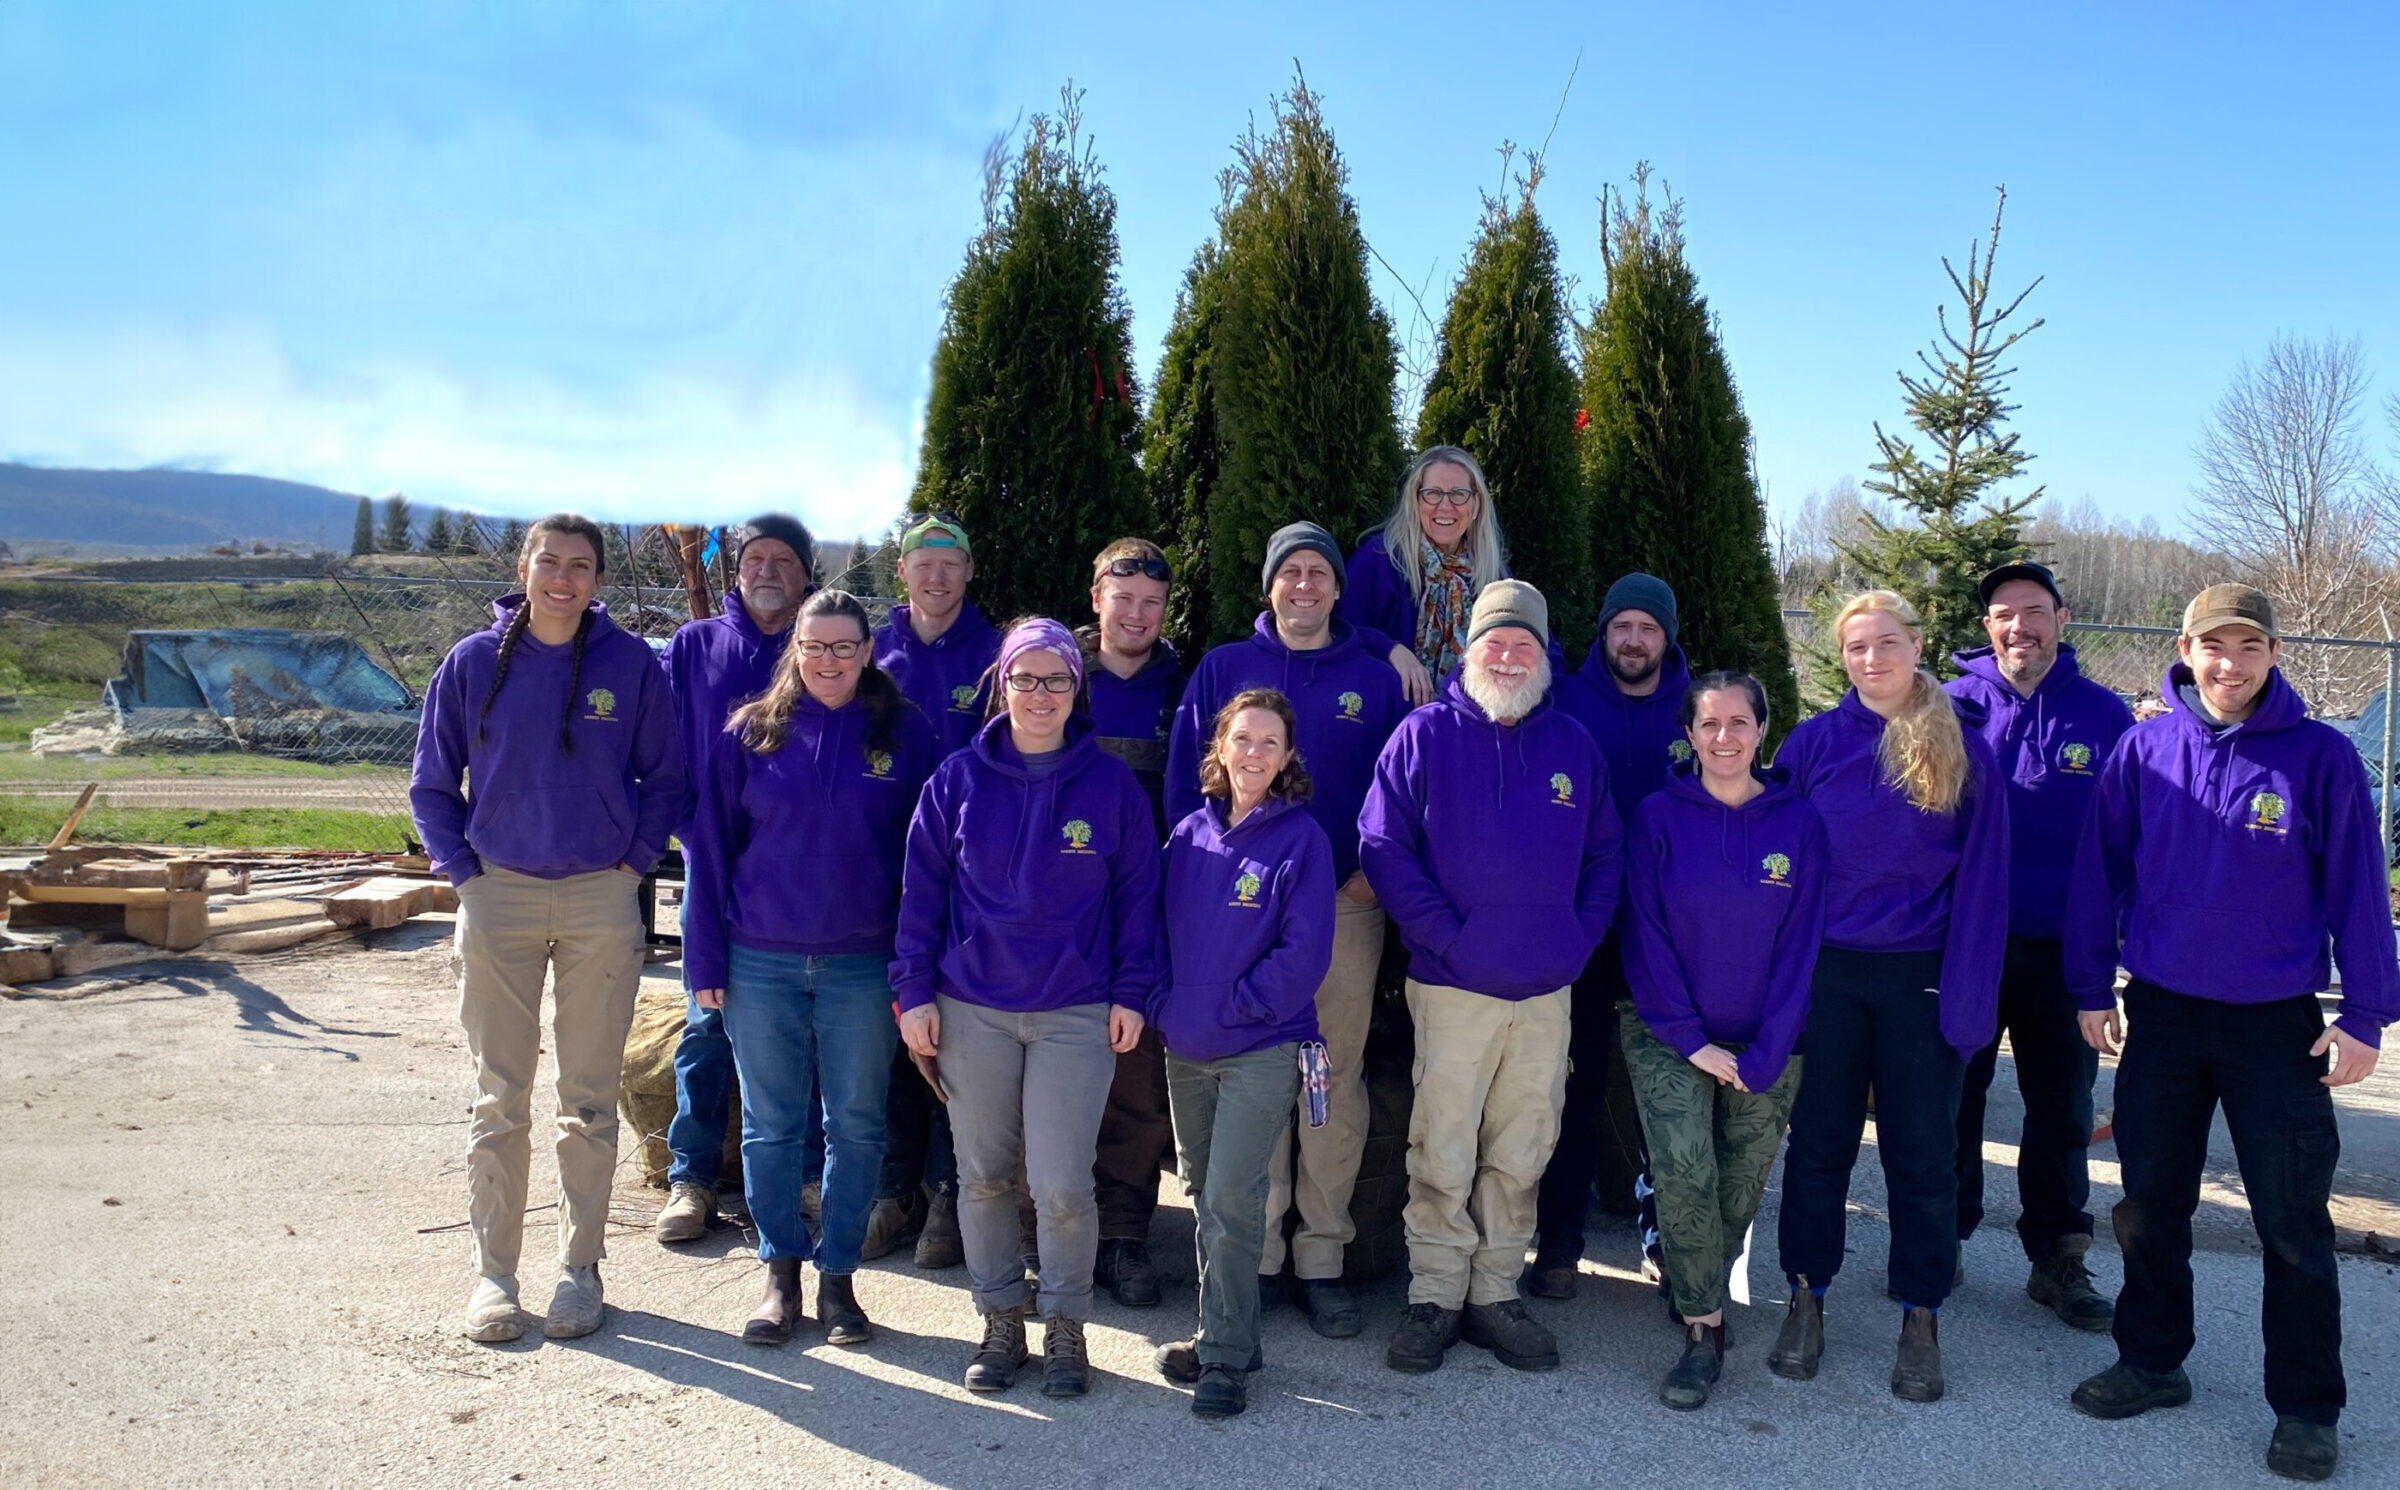 A group of people in matching purple jackets smiling outdoors, with tall conifer trees and a clear blue sky in the background.